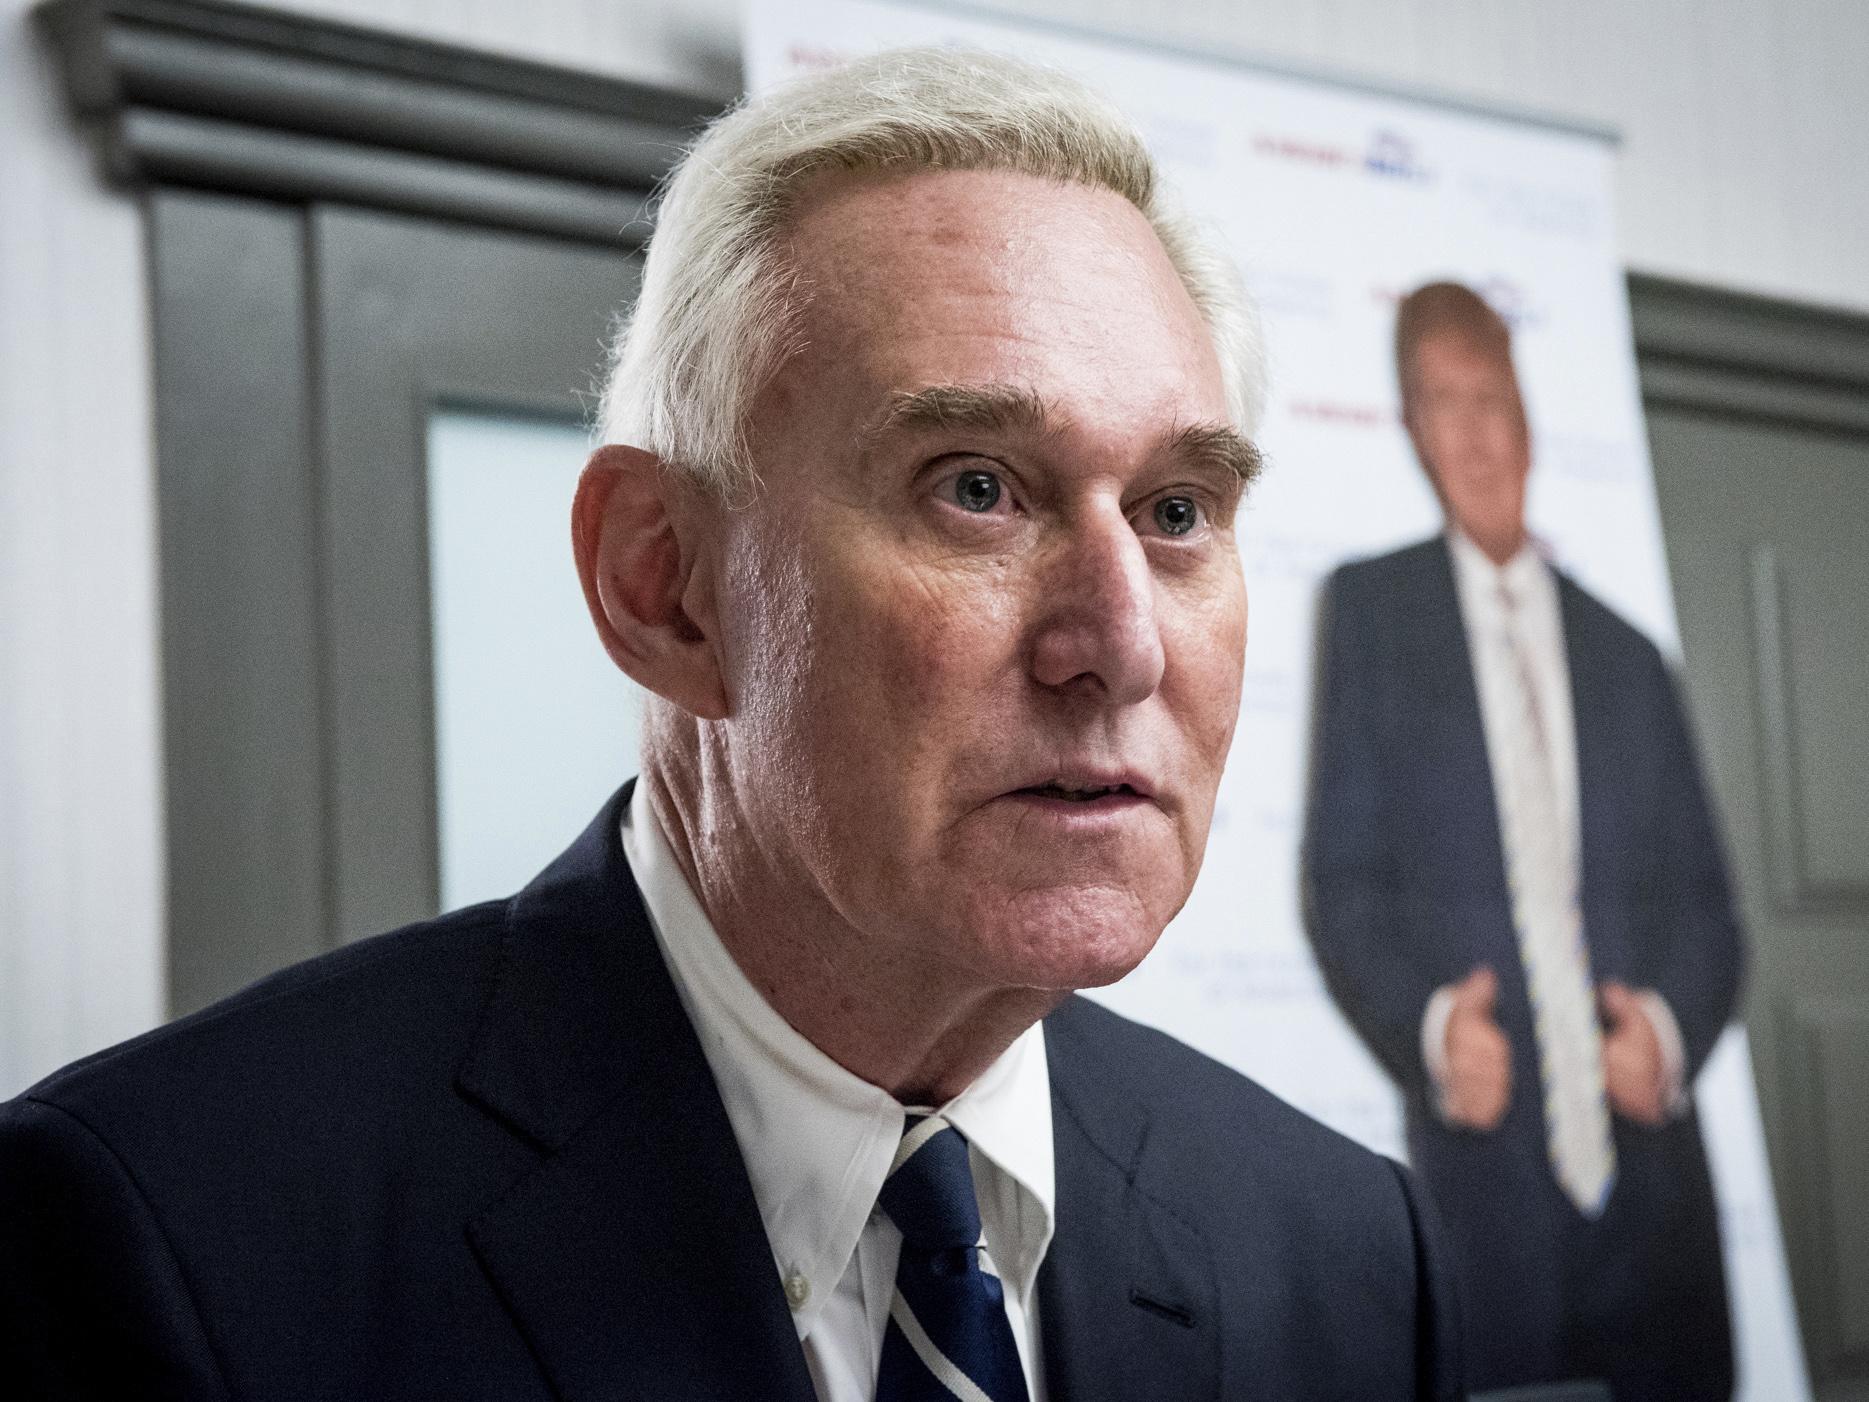 Roger Stone speaks to members of the conservative group America First at the Marriott in Boca Raton, Florida